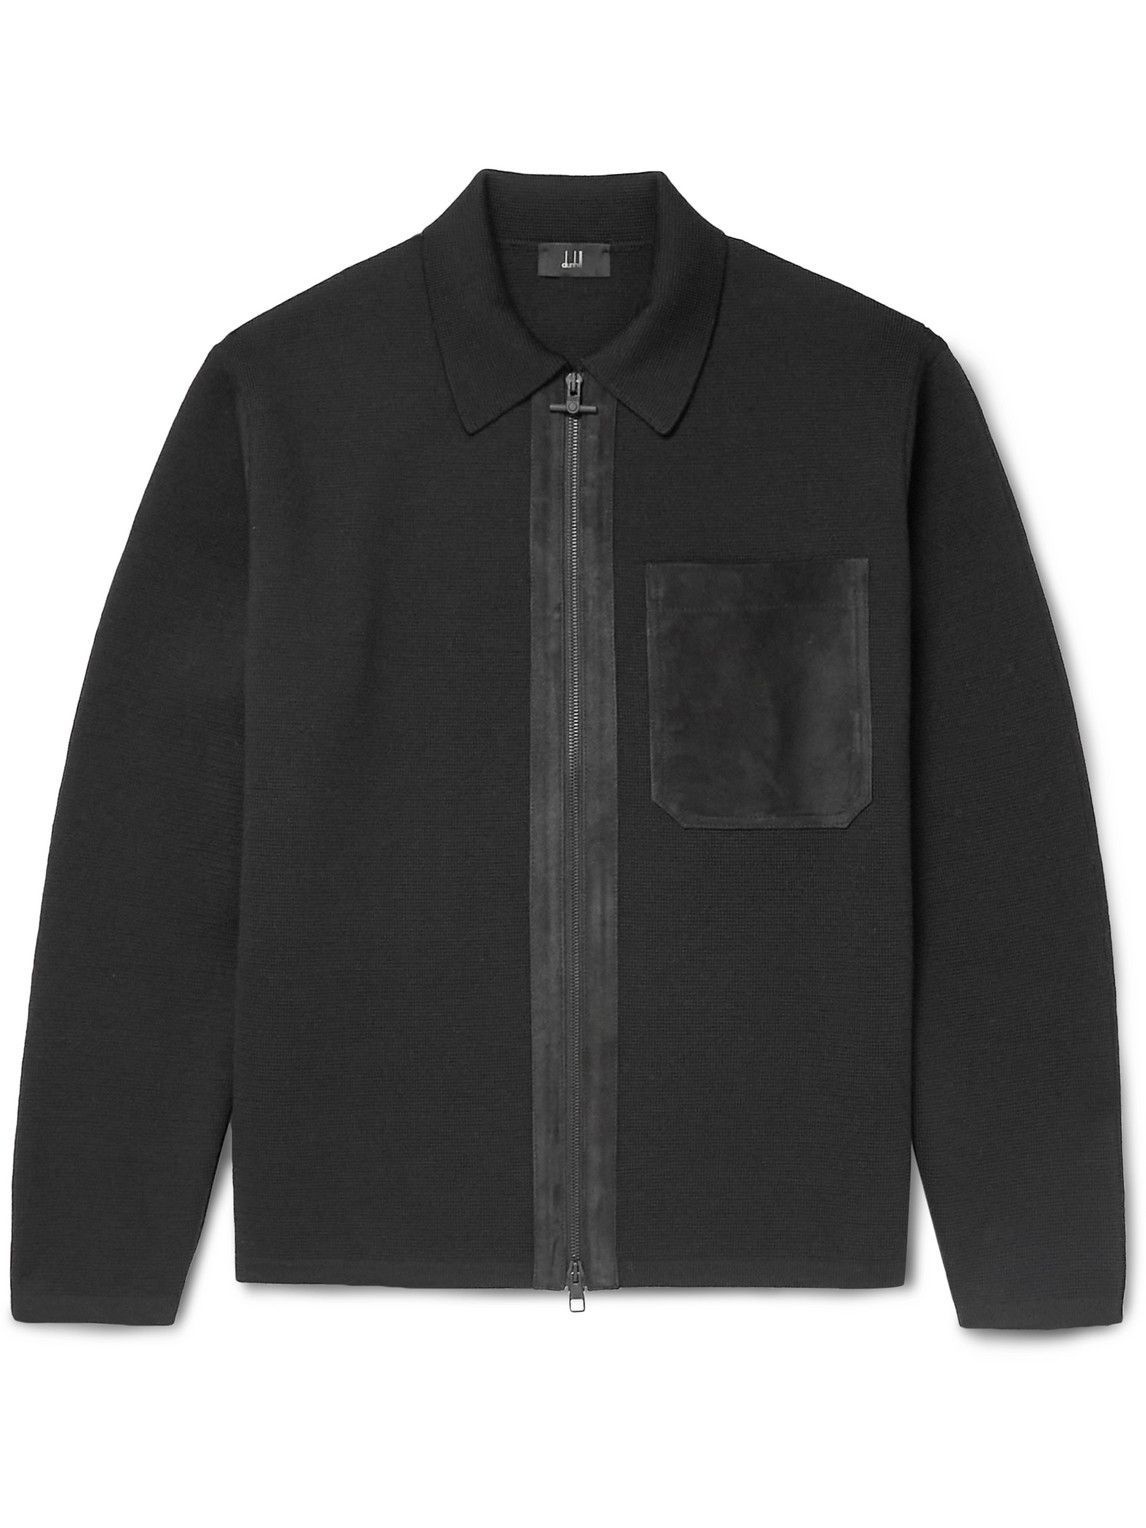 Dunhill - Suede-Trimmed Merino Wool Overshirt - Black Dunhill